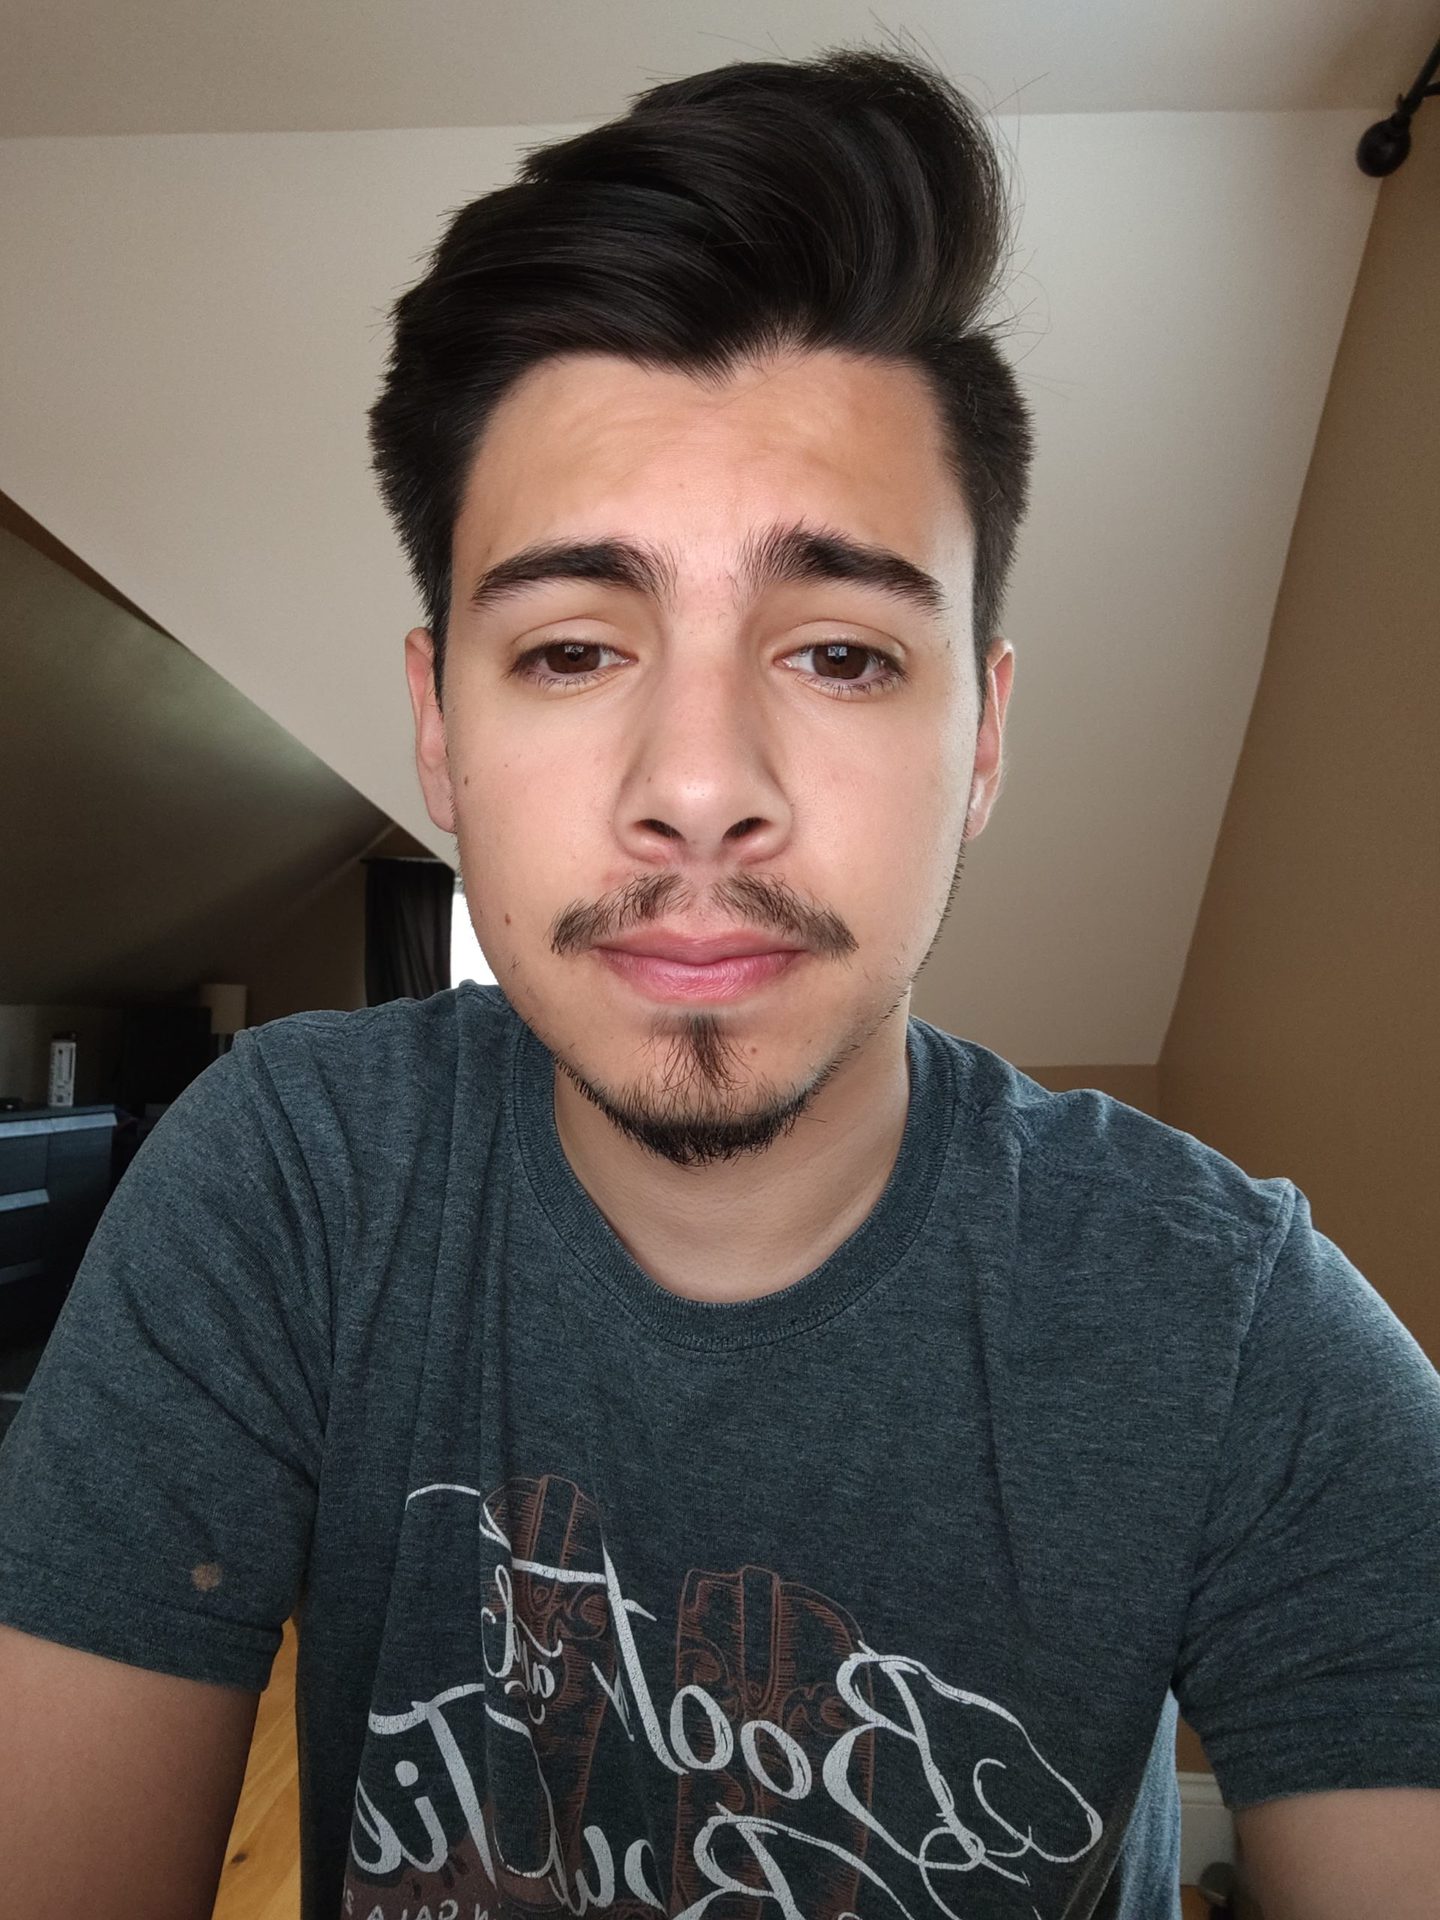 TCL 20 Pro 5G front-facing camera selfie of a dark-haired man in a gray t-shirt indoors.